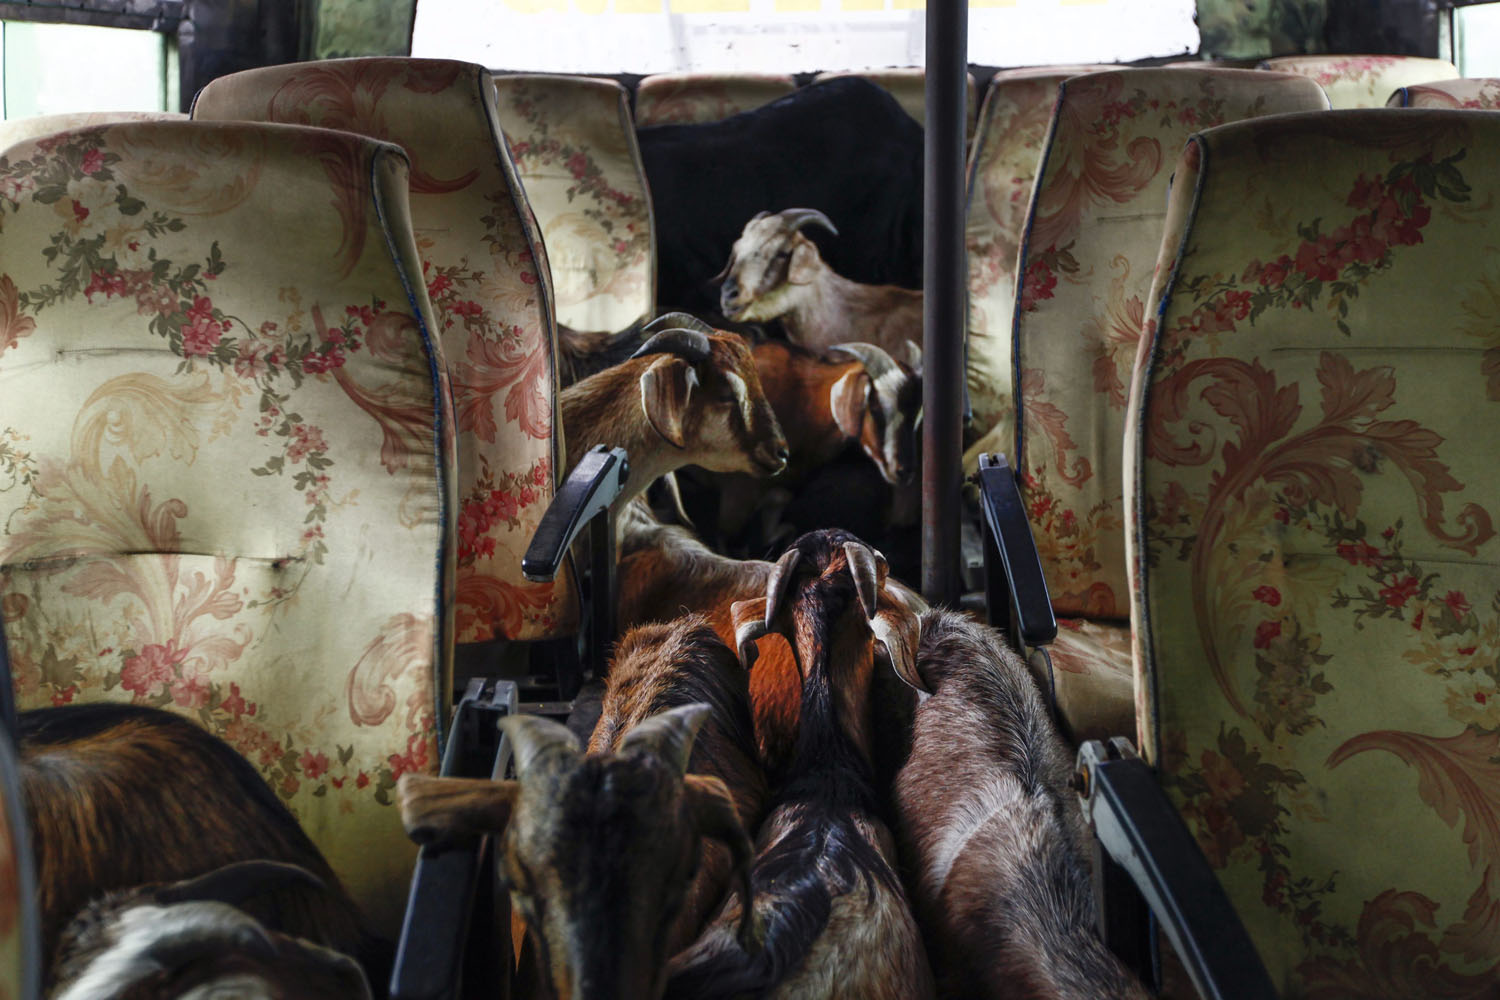 Oct. 1, 2013. Goats sit on passenger seats as they are imported from various district at a goat market in Kathmandu, Nepal.